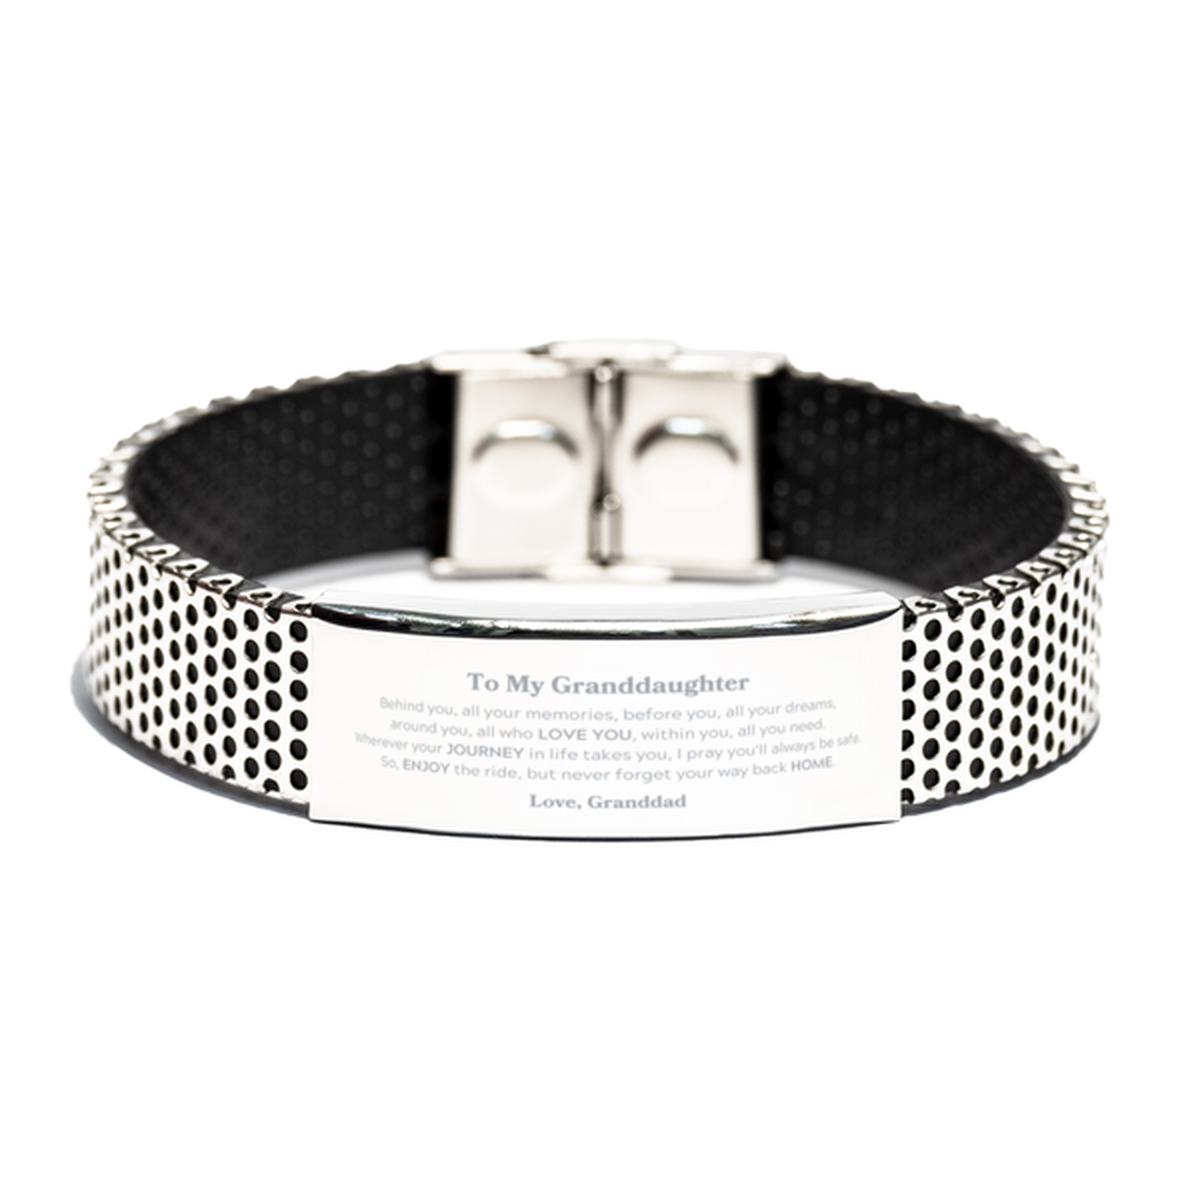 To My Granddaughter Graduation Gifts from Granddad, Granddaughter Stainless Steel Bracelet Christmas Birthday Gifts for Granddaughter Behind you, all your memories, before you, all your dreams. Love, Granddad